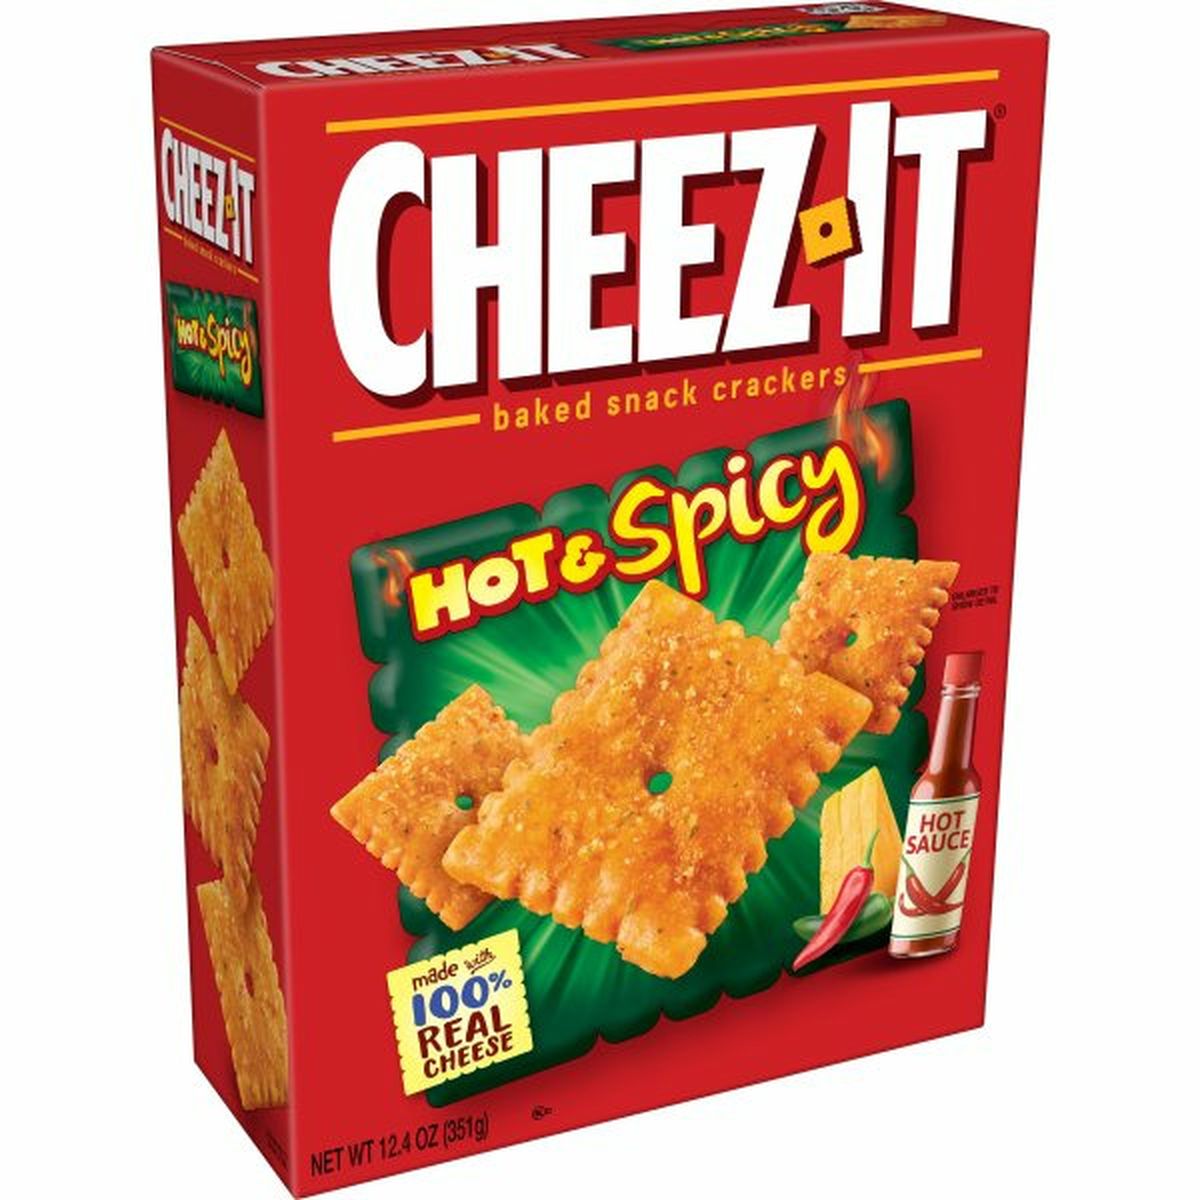 Calories in Cheez-It Crackers Cheez-It Baked Snack Cheese Crackers, Hot & Spicy, 12.4oz